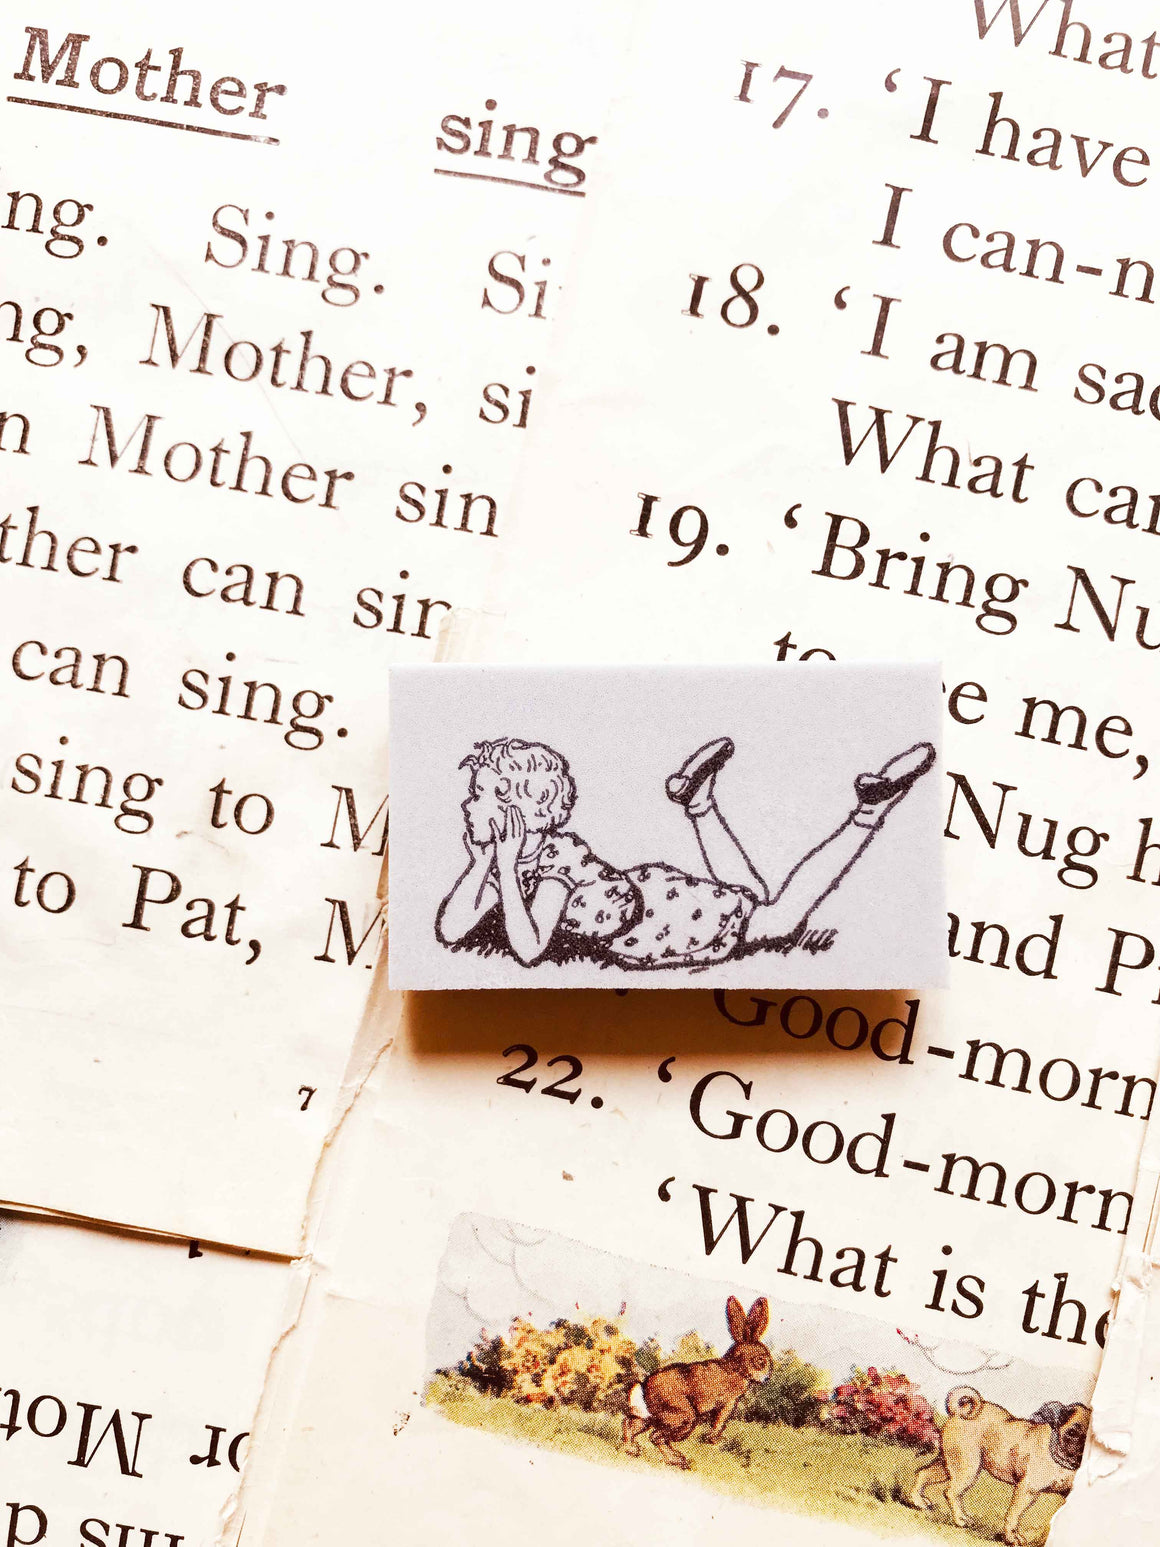 'Daydreaming Girl' - PRE-ORDER (Mic Moc Rubber Stamps Feb 2020) from micmoc.com at Mic Moc